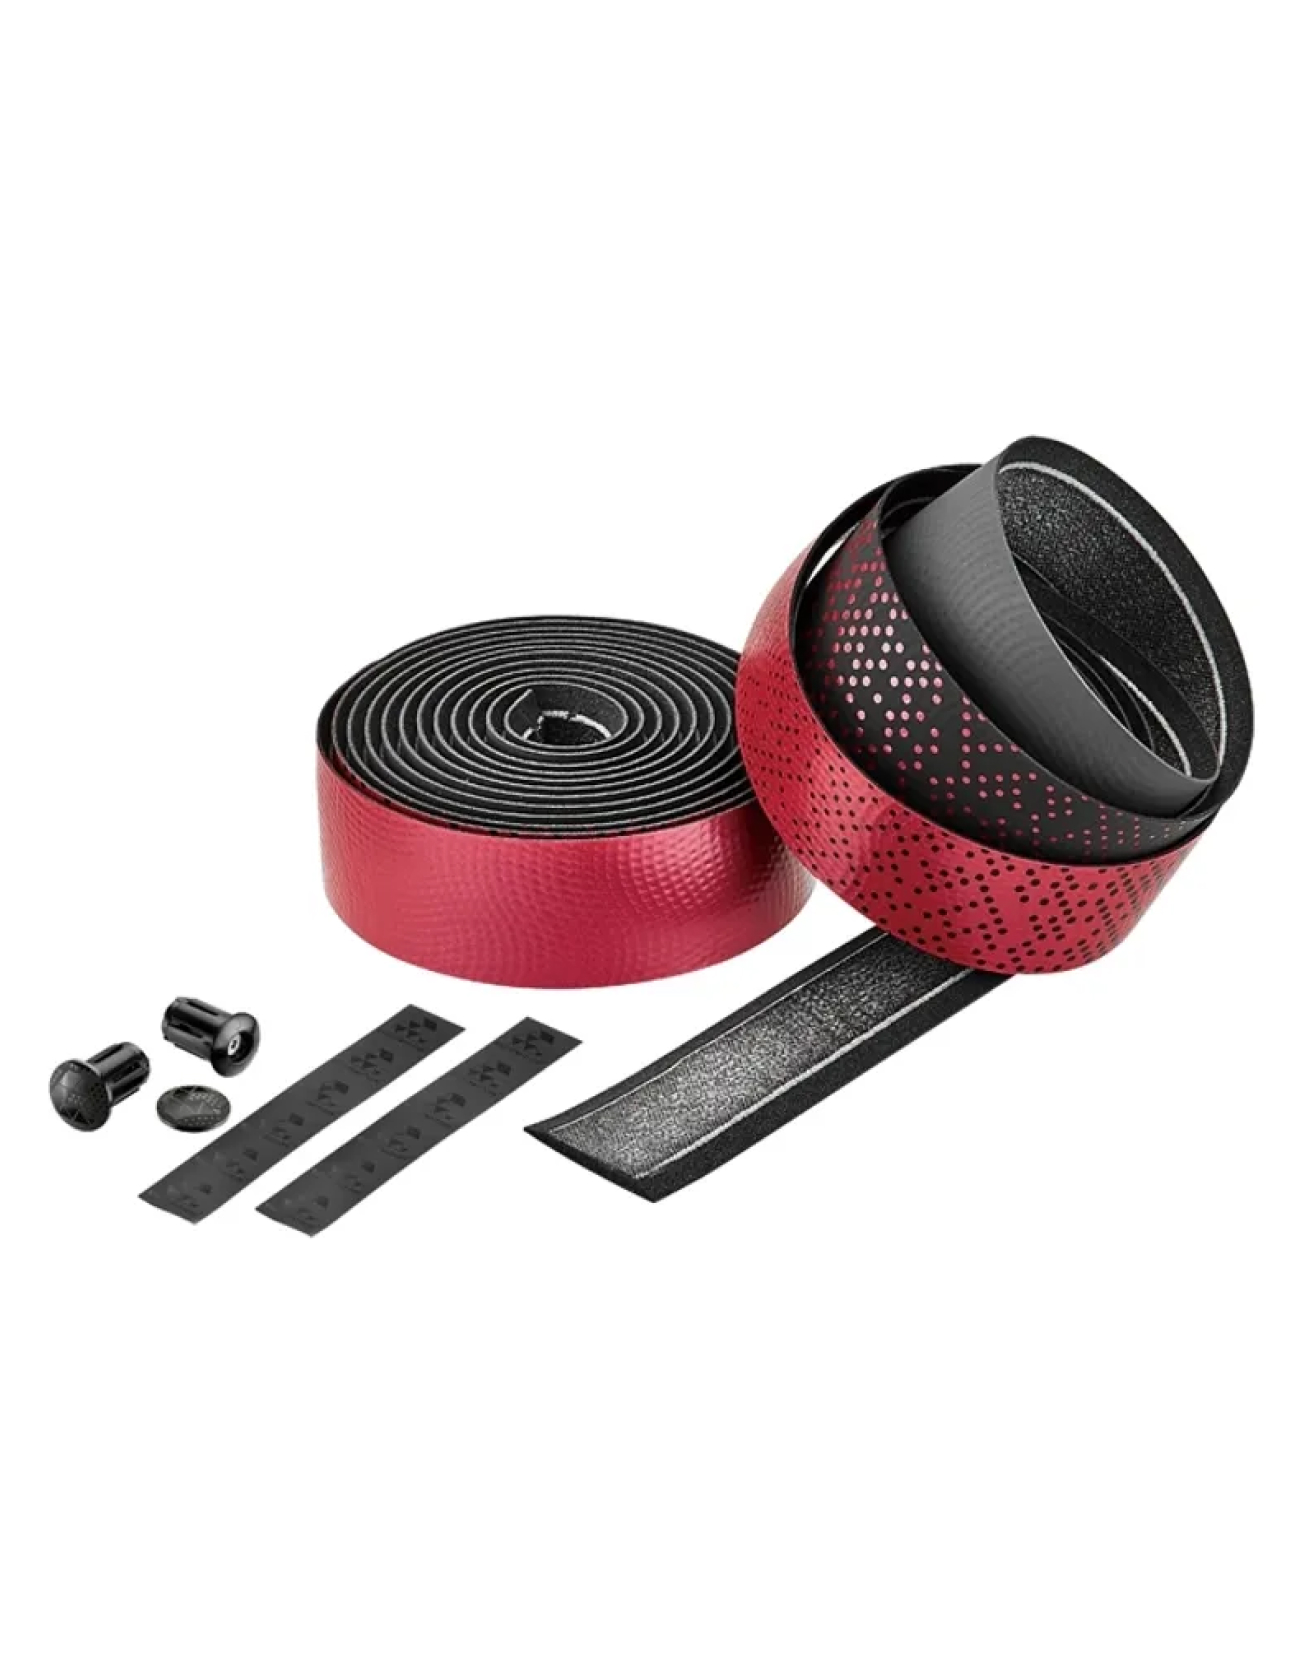 Advanced Bar Tape Candy Apple Red